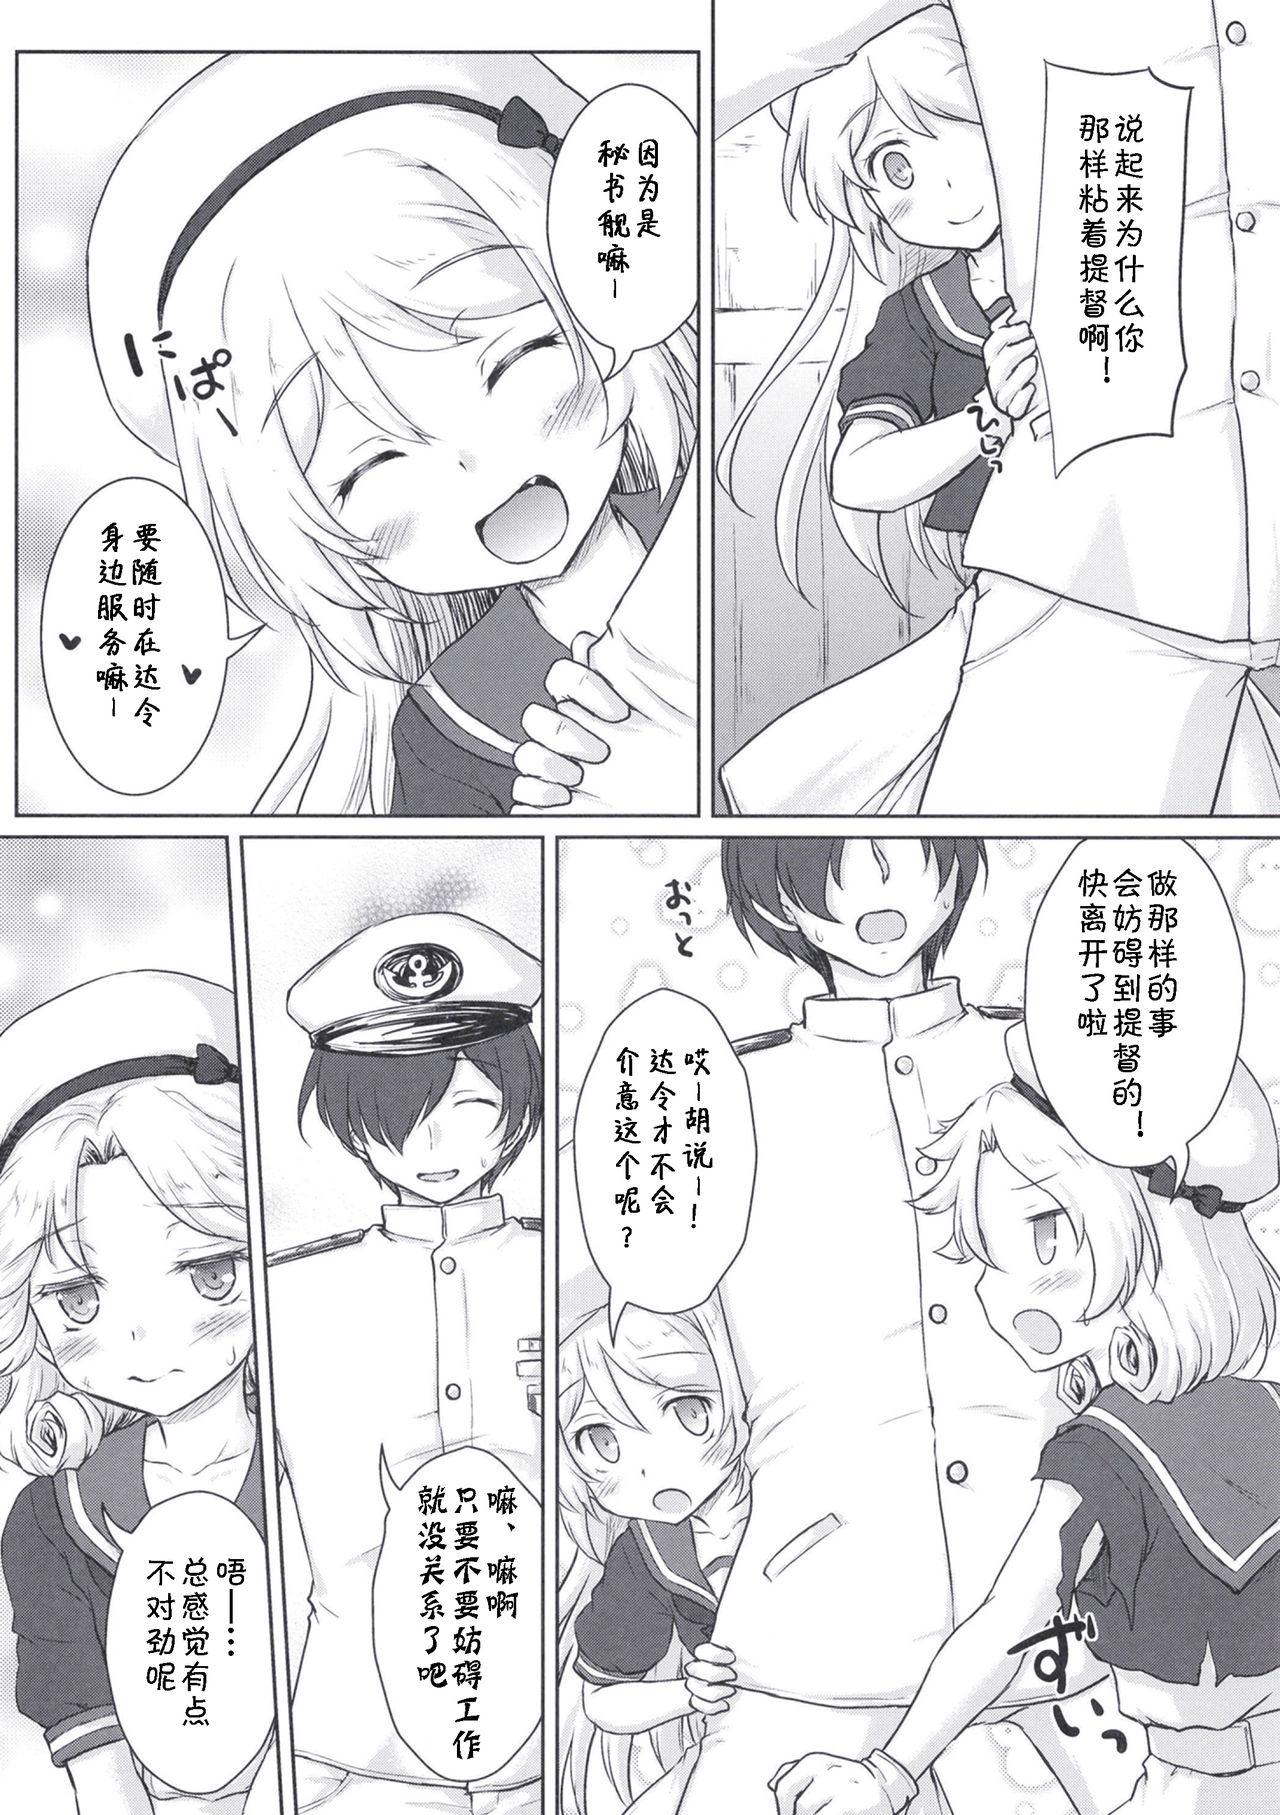 Porra Darling is in sight! act2 - Kantai collection Sextoys - Page 7